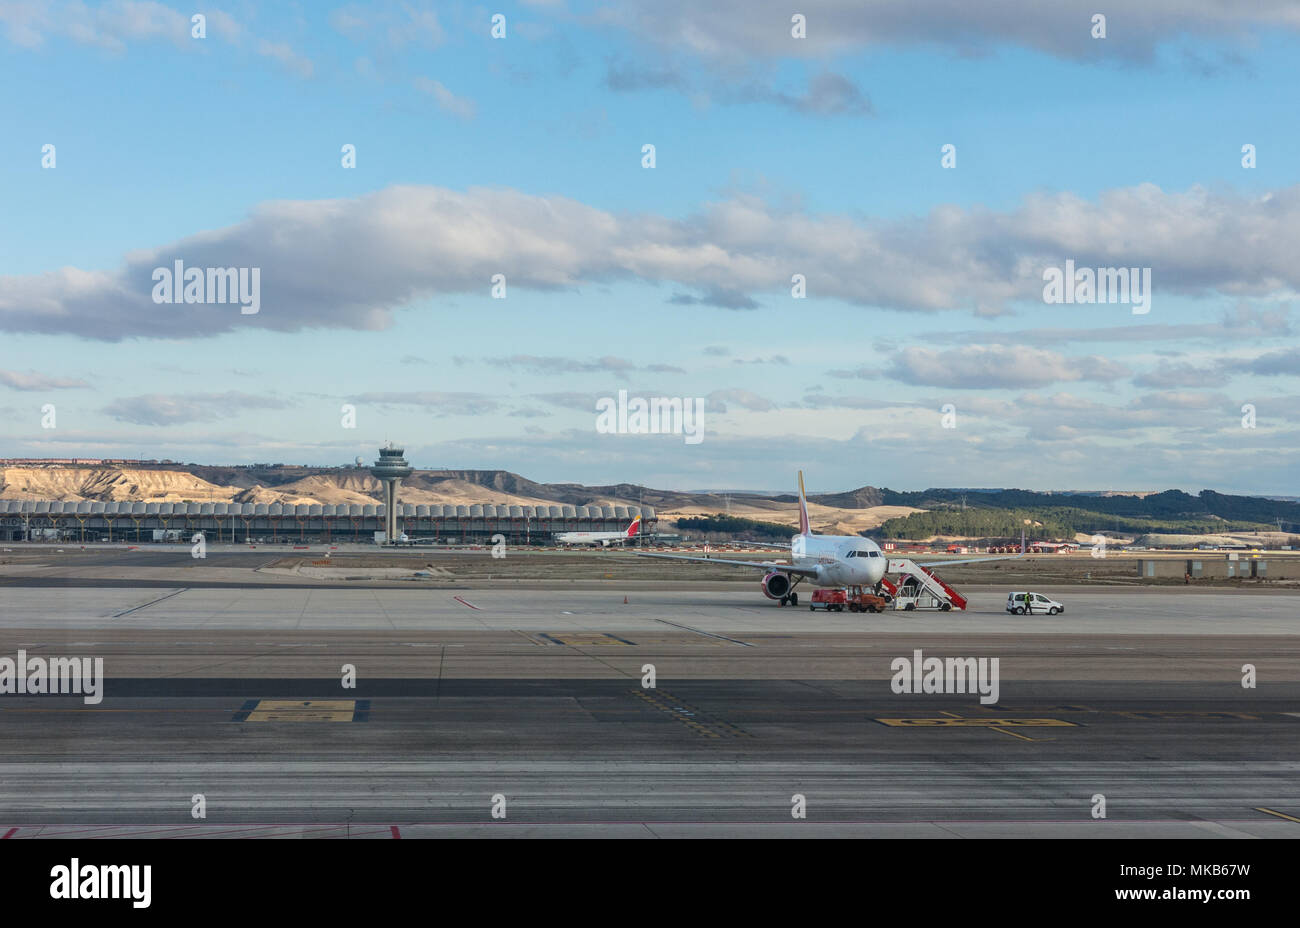 A plane prepares to take off on the runway of Terminal T4 the Adolfo Suarez Madrid Barajas Airport. Barajas is the main international airport in Madri Stock Photo